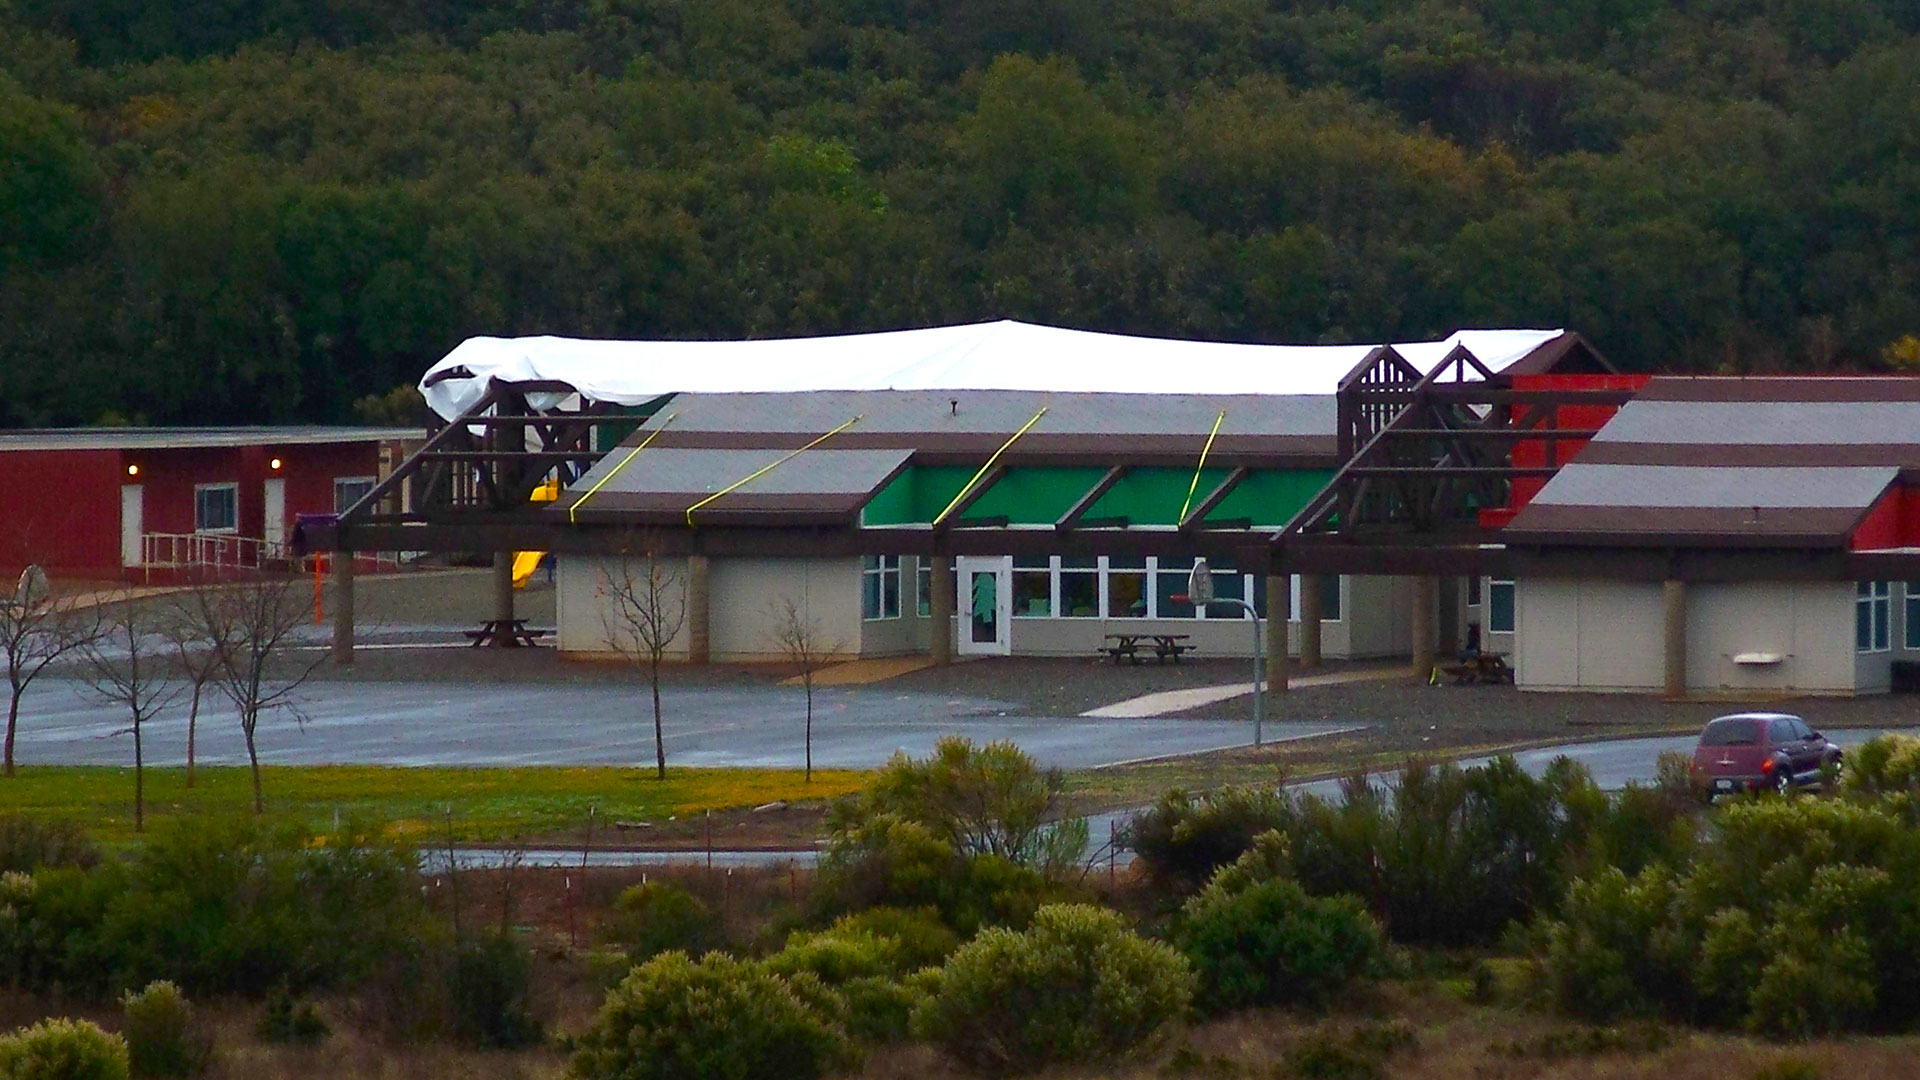 Campus building during reroof, with tarps covering vast sections of roof.